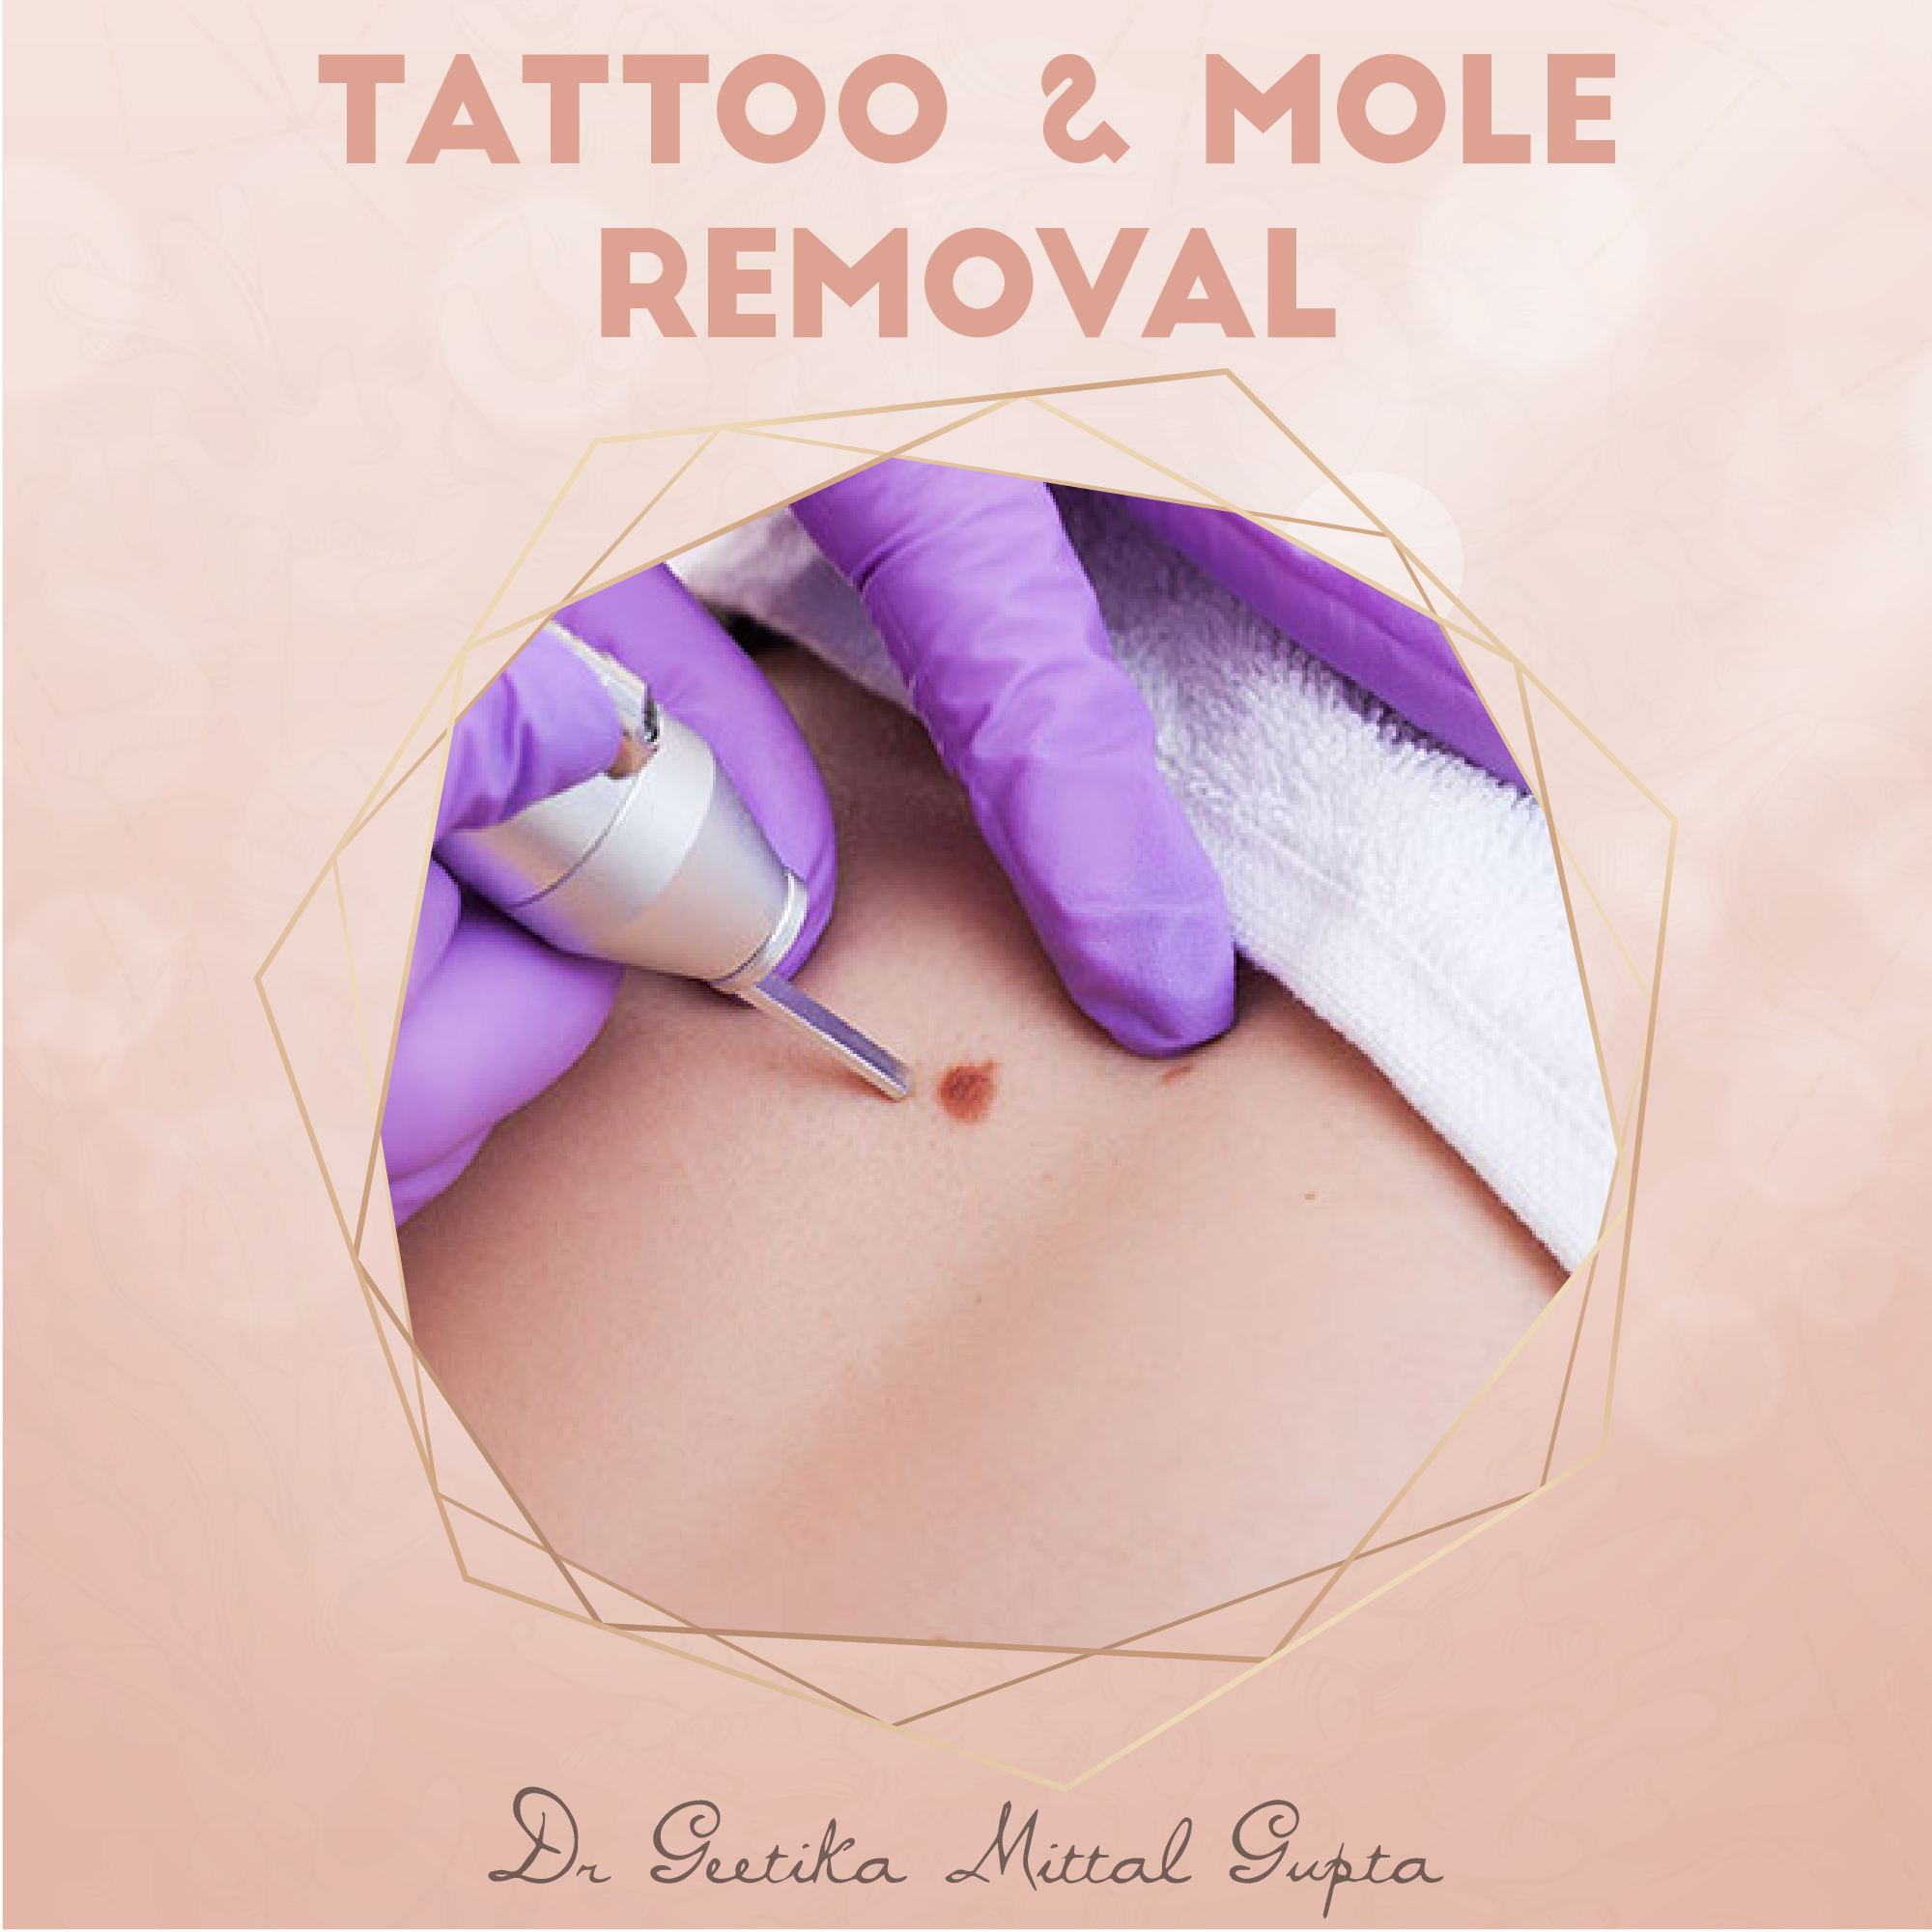 Are UV Tattoos worth the Risk? - Austin Tattoo Removal - Clean Slate Ink